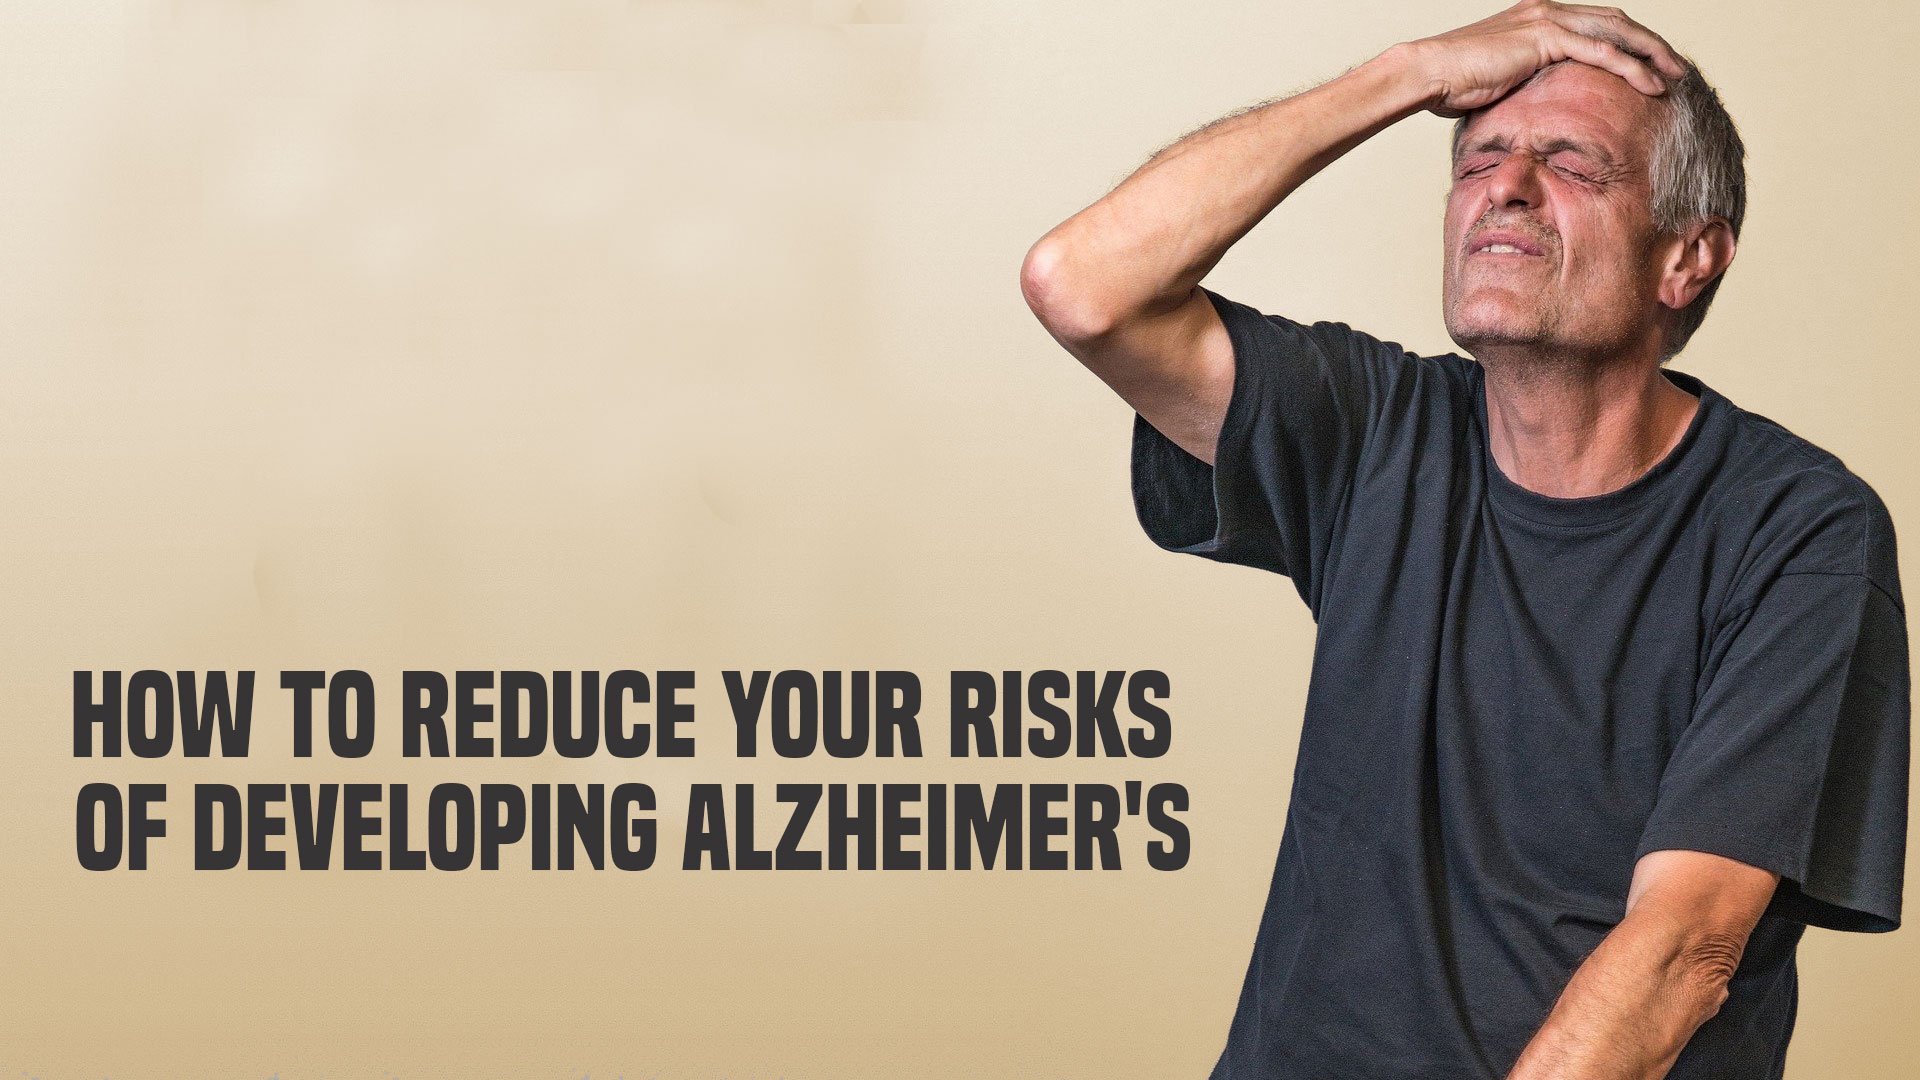 How to Reduce Your Risks of Developing Alzheimer